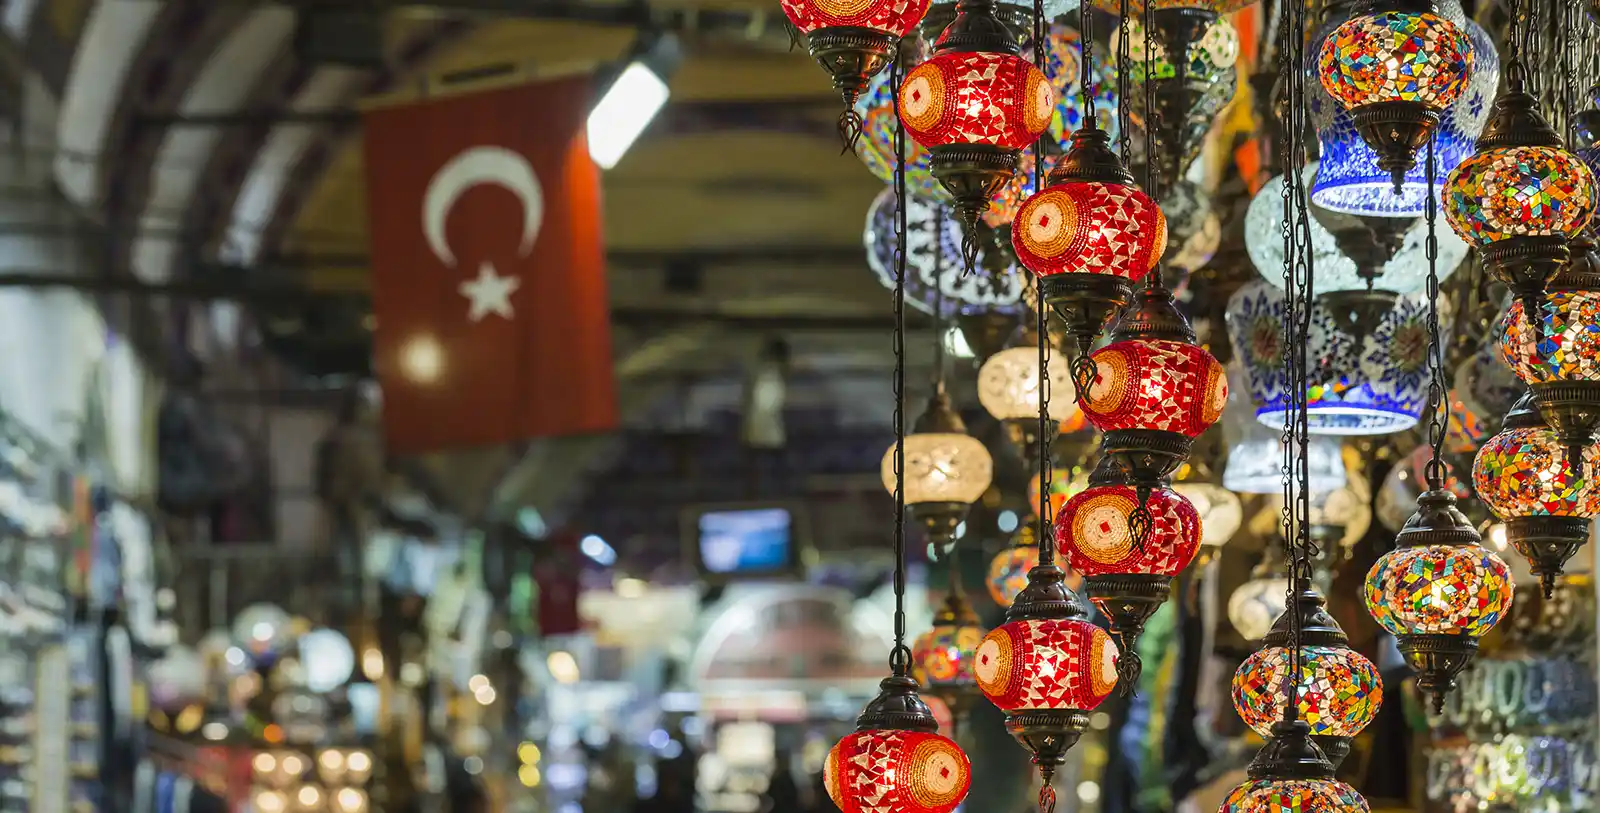 A colorful scene in the Grand Bazaar of Istanbul where Turkish language is spoken even by visitors!